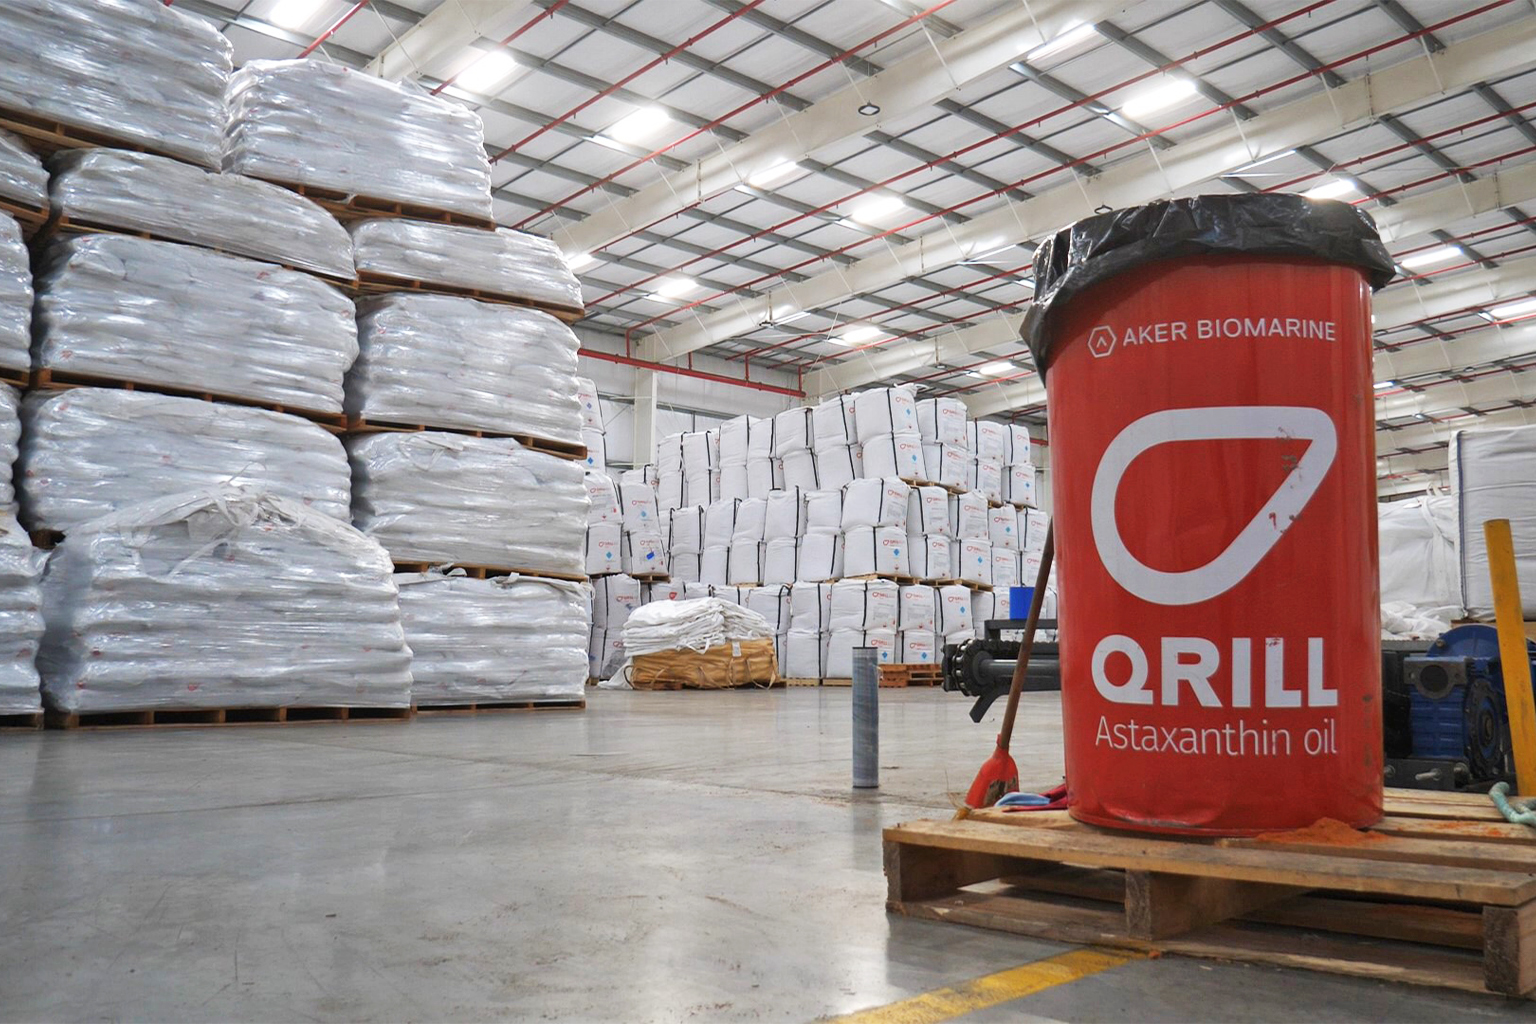 A warehouse with bags of krill meal.